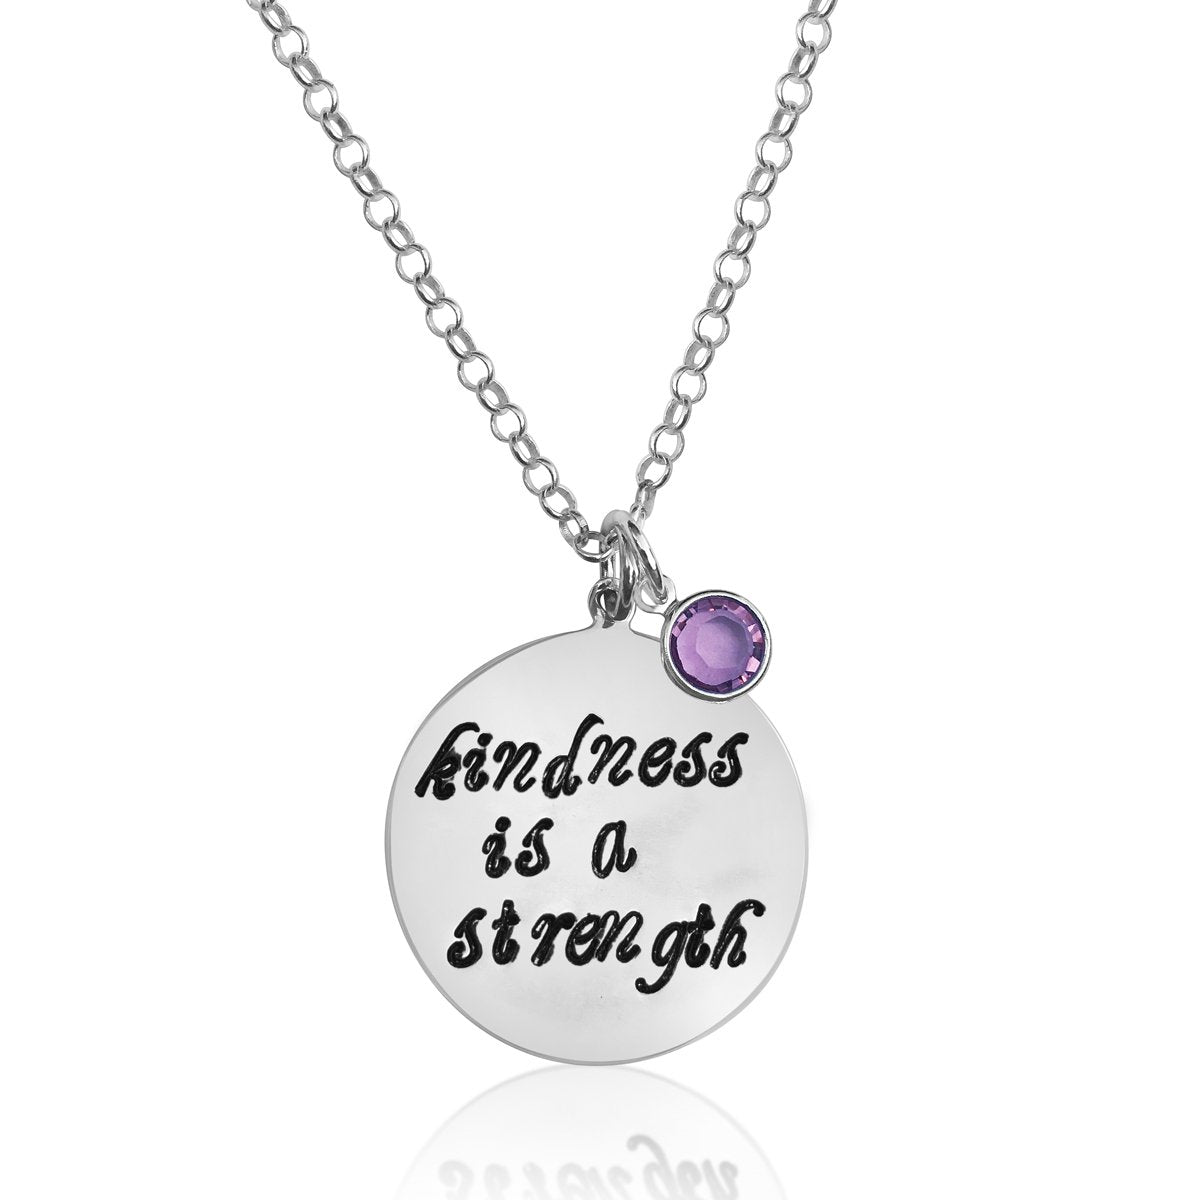 Kindness is a Strength Sterling Silver Necklace, Kindness Wins Jewelry